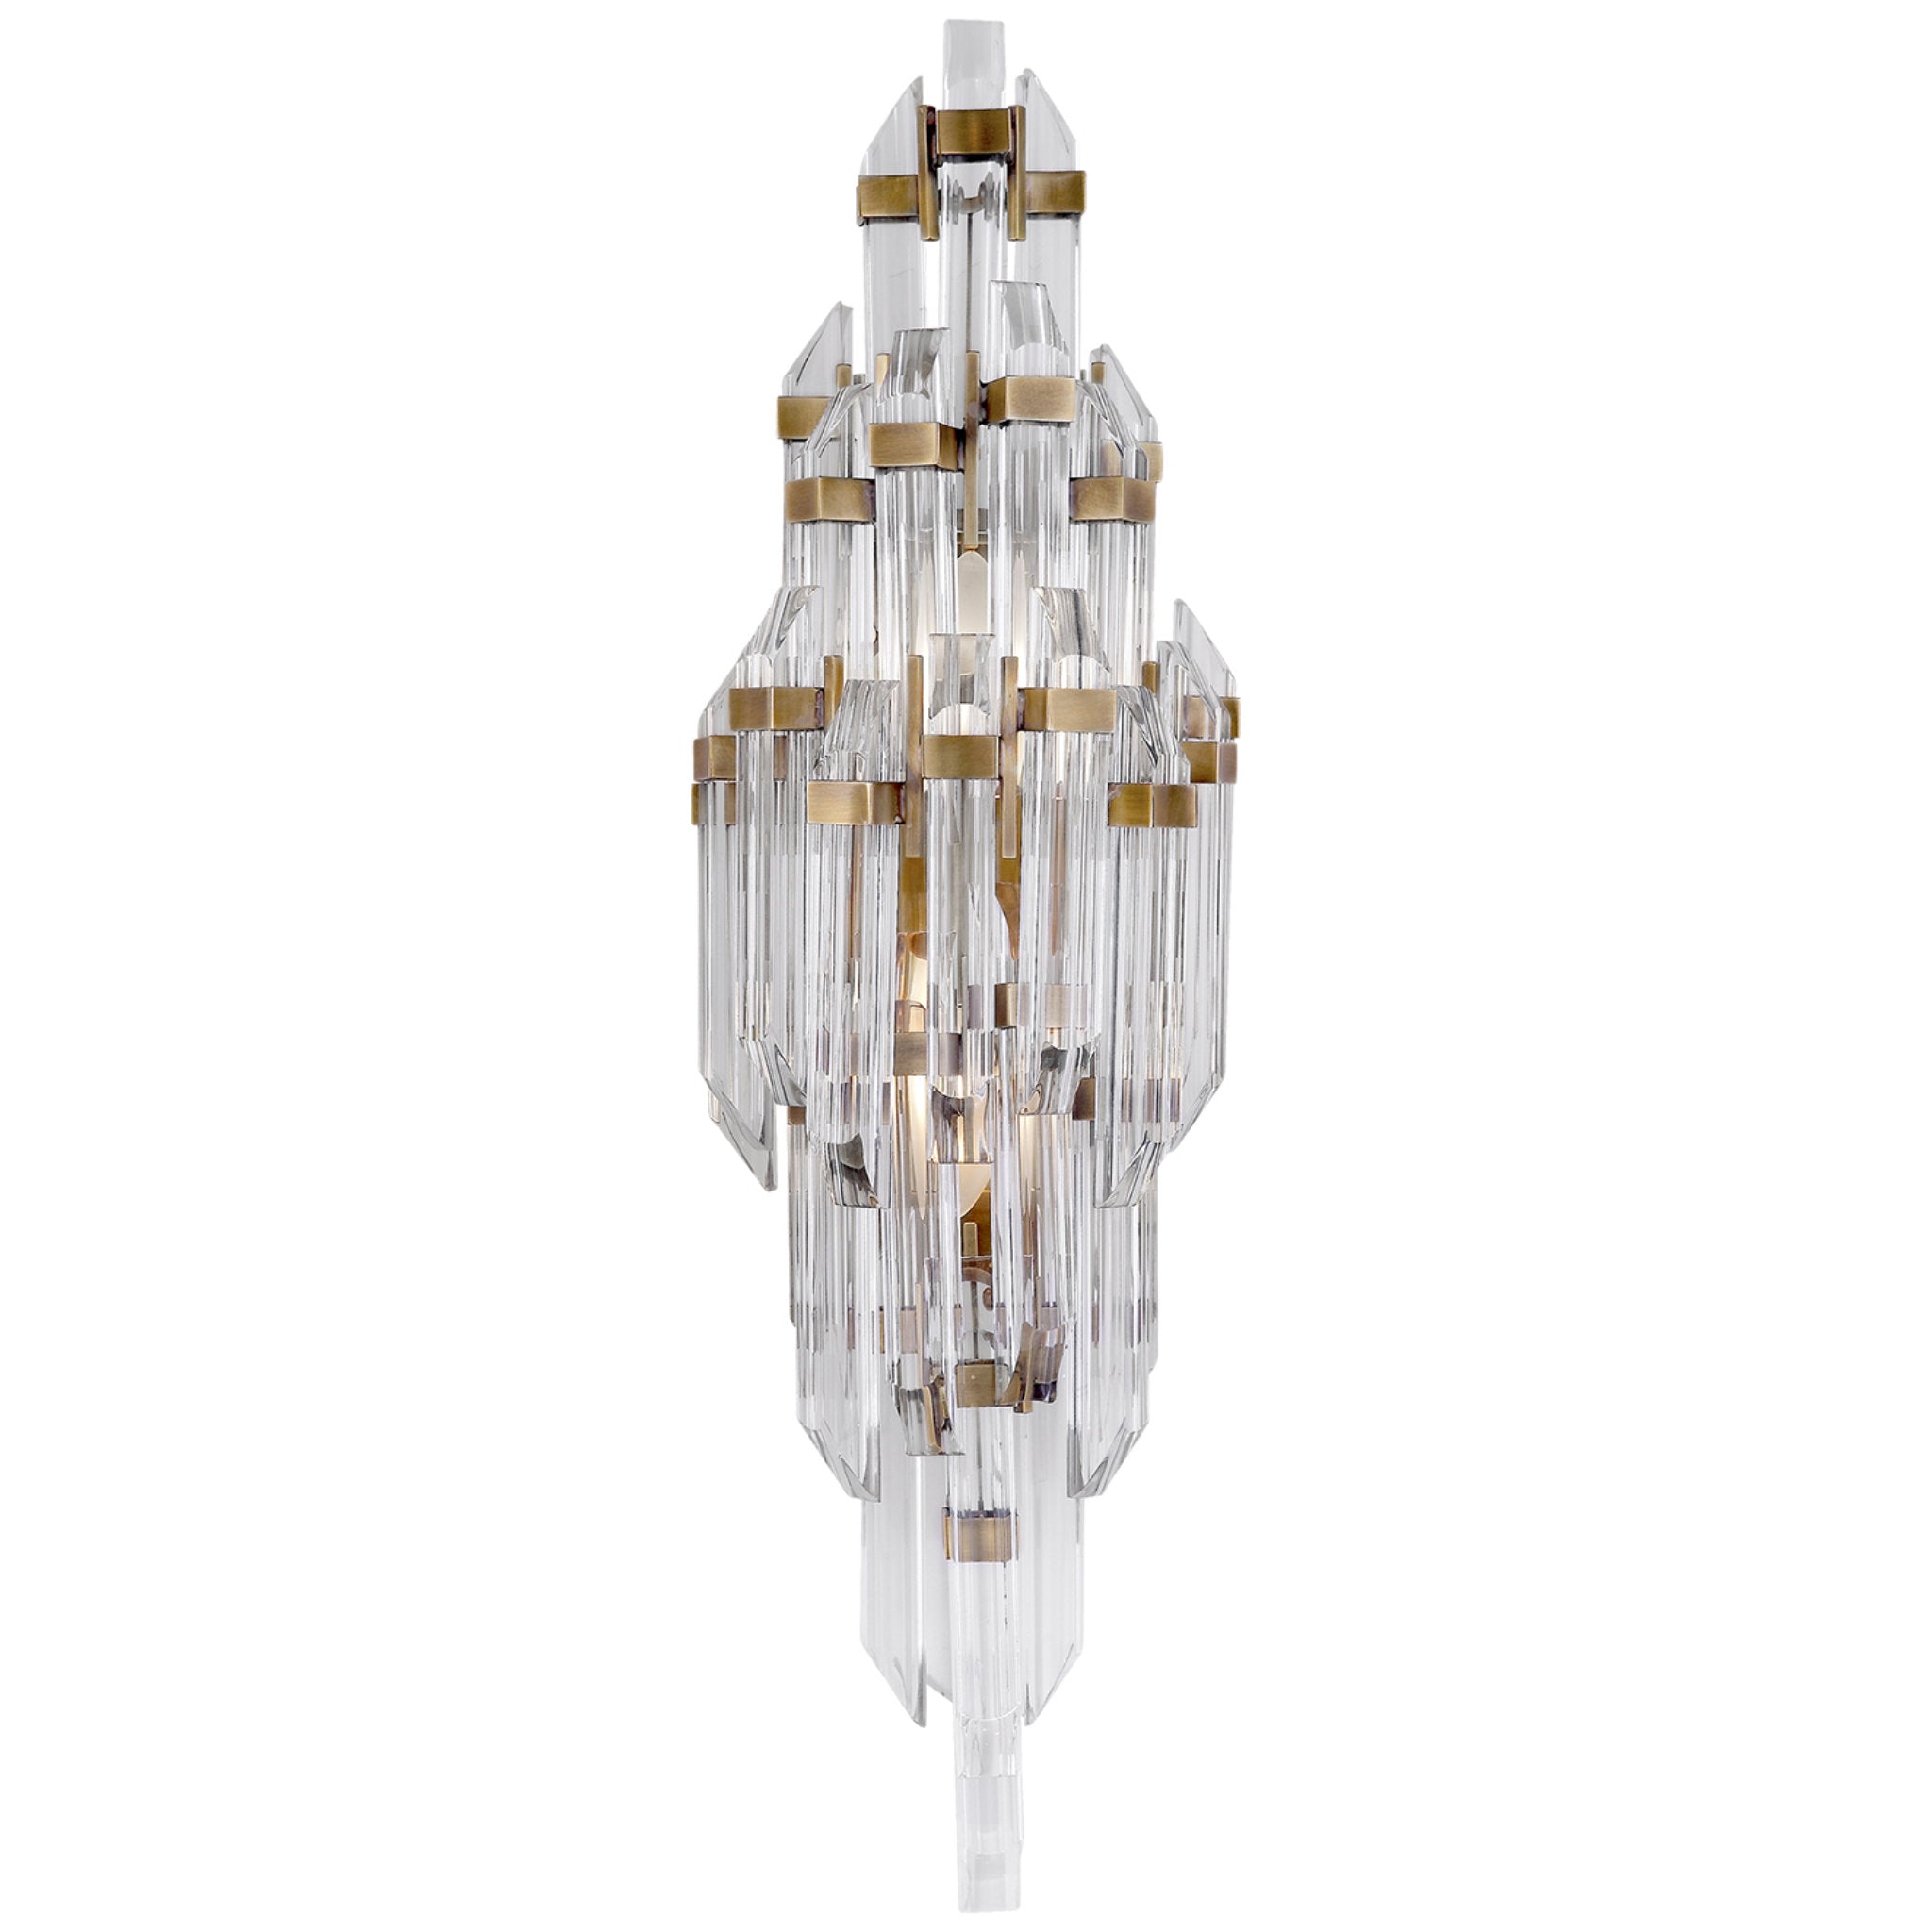 ADELE FOUR-TIER WATERFALL Brass chandelier By Visual Comfort Europe